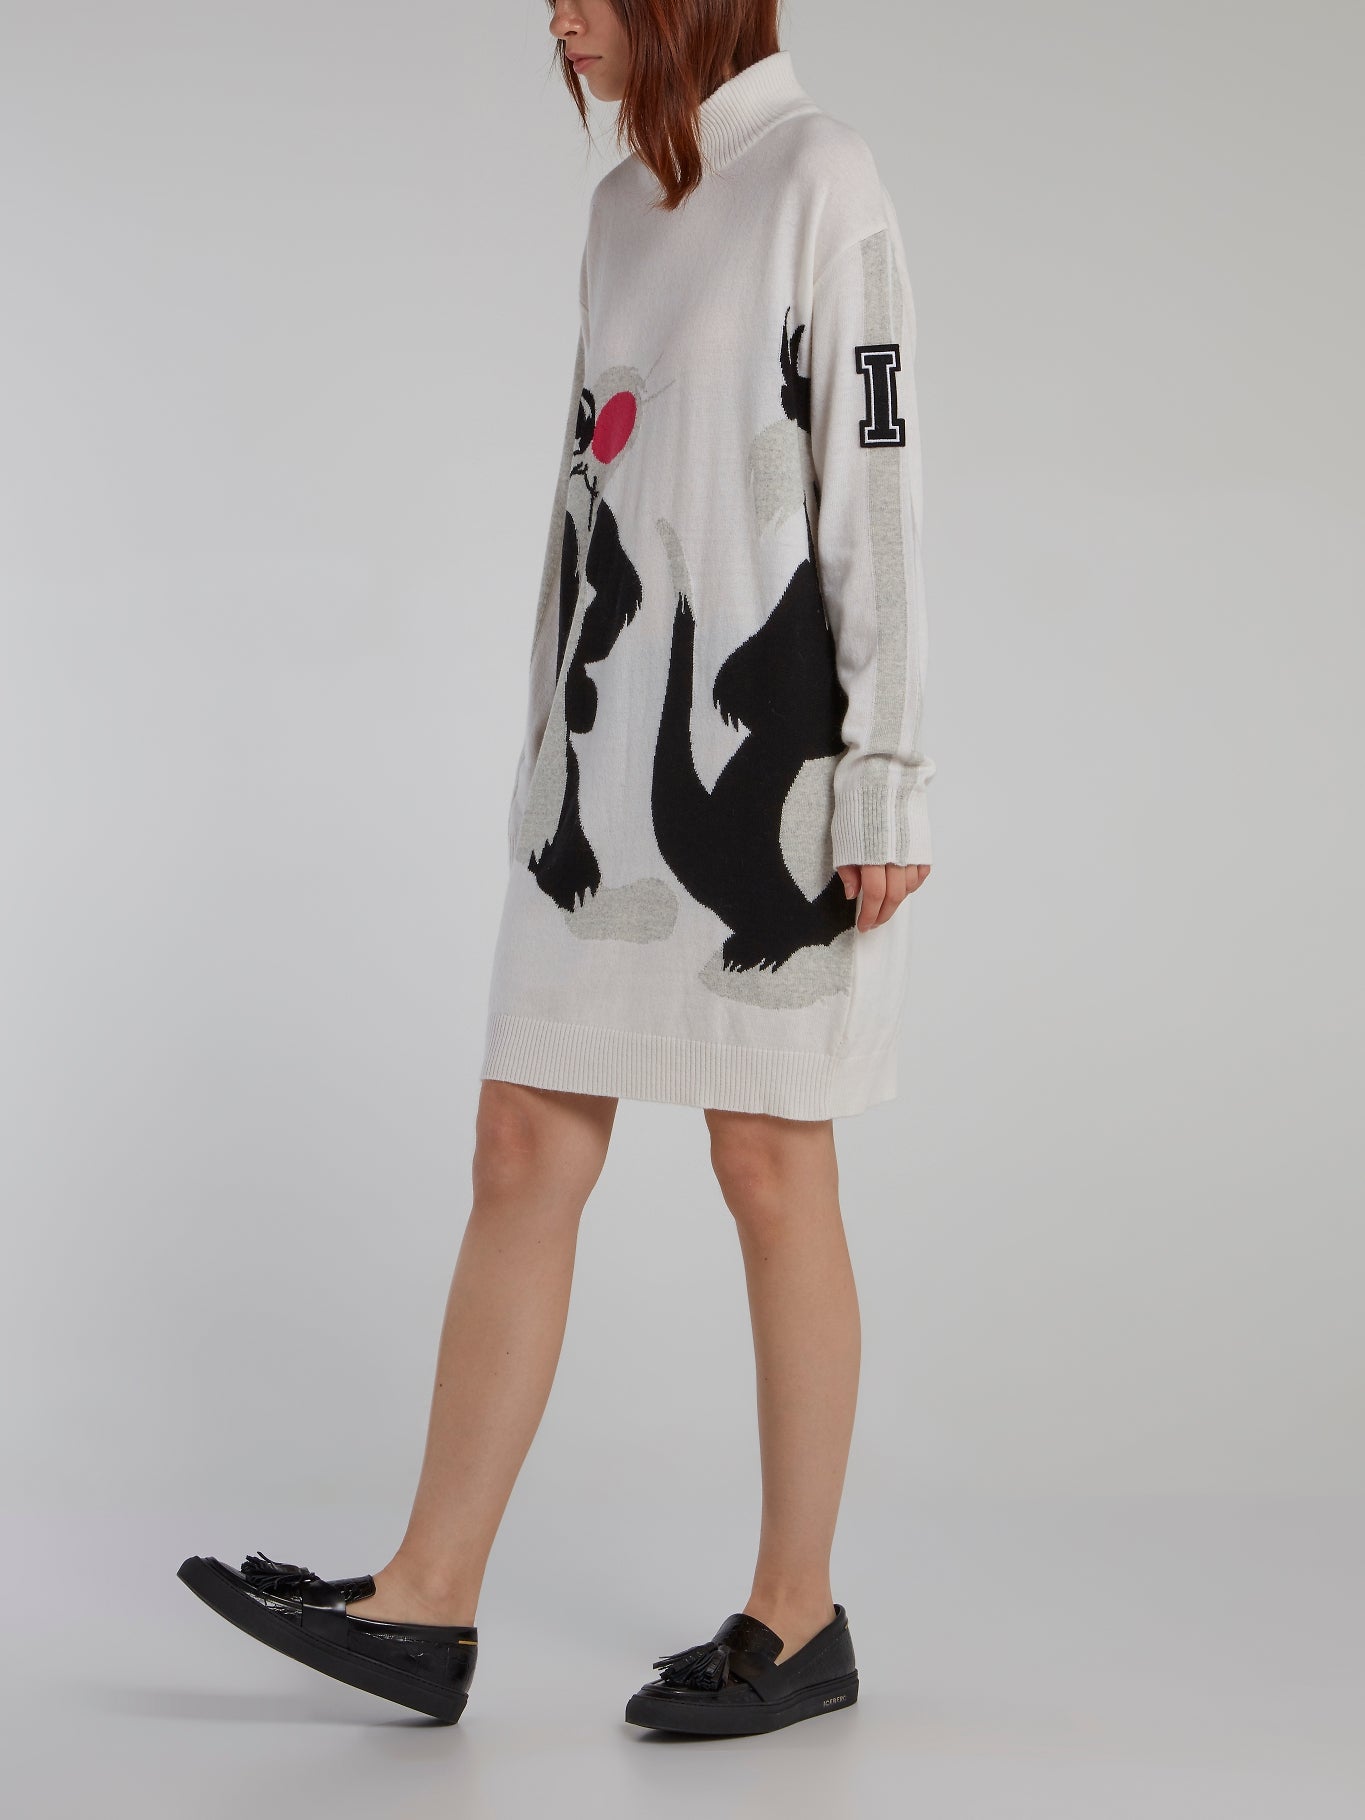 Sylvester The Cat White Sweater Dress